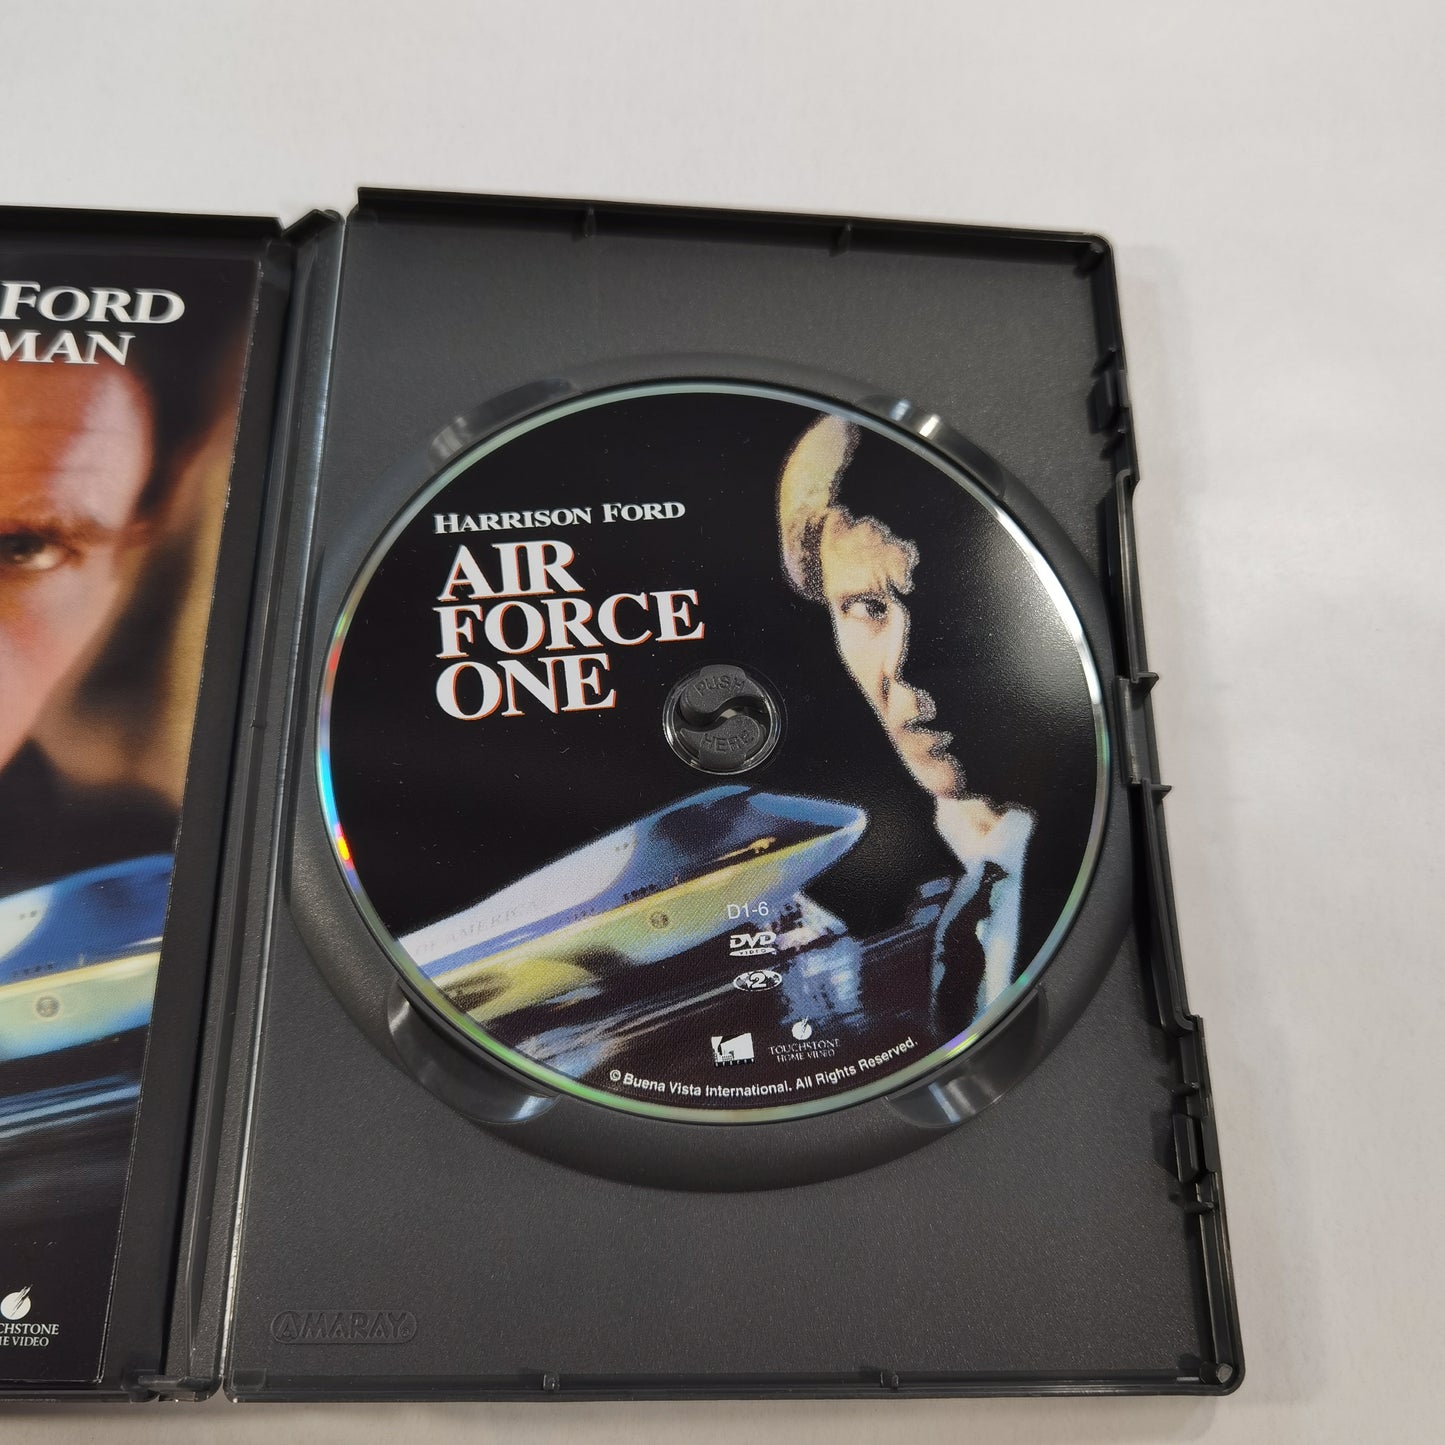 Air Force One (1997) - DVD DK Special Edition